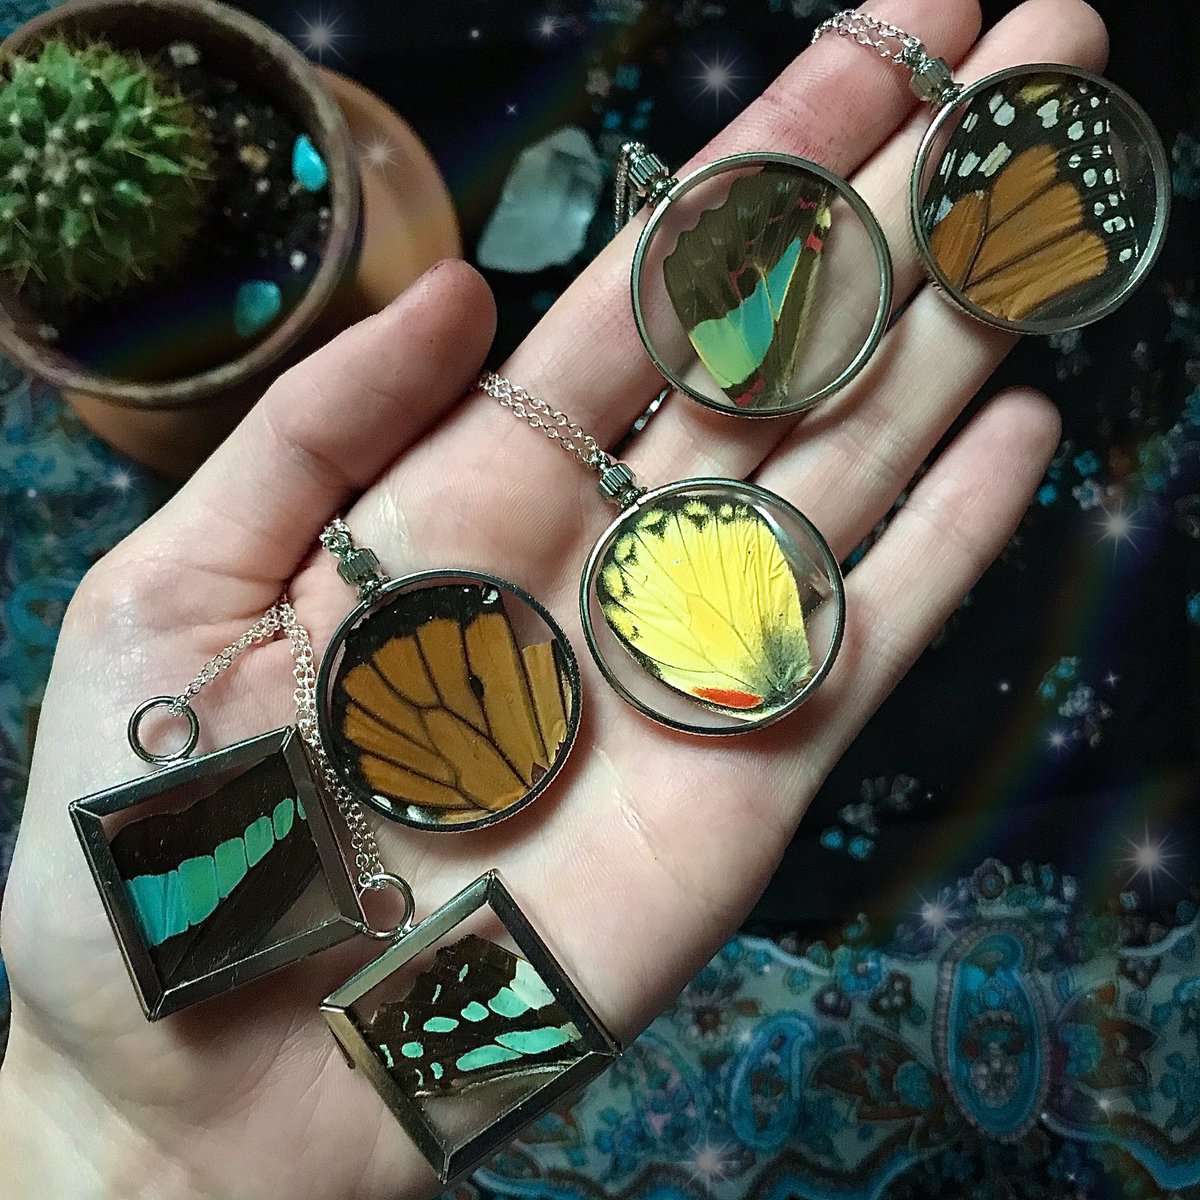 Long time, no see! 👁 Check out these new ethically sourced butterfly wing pendants that just hit the shop! 🦋✨
.
I wish you nothing but happiness, good health, and all the good vibes this new coming year of 2021. 💖
.
Link in the bio. 😸
#butterfly #butterflynecklace